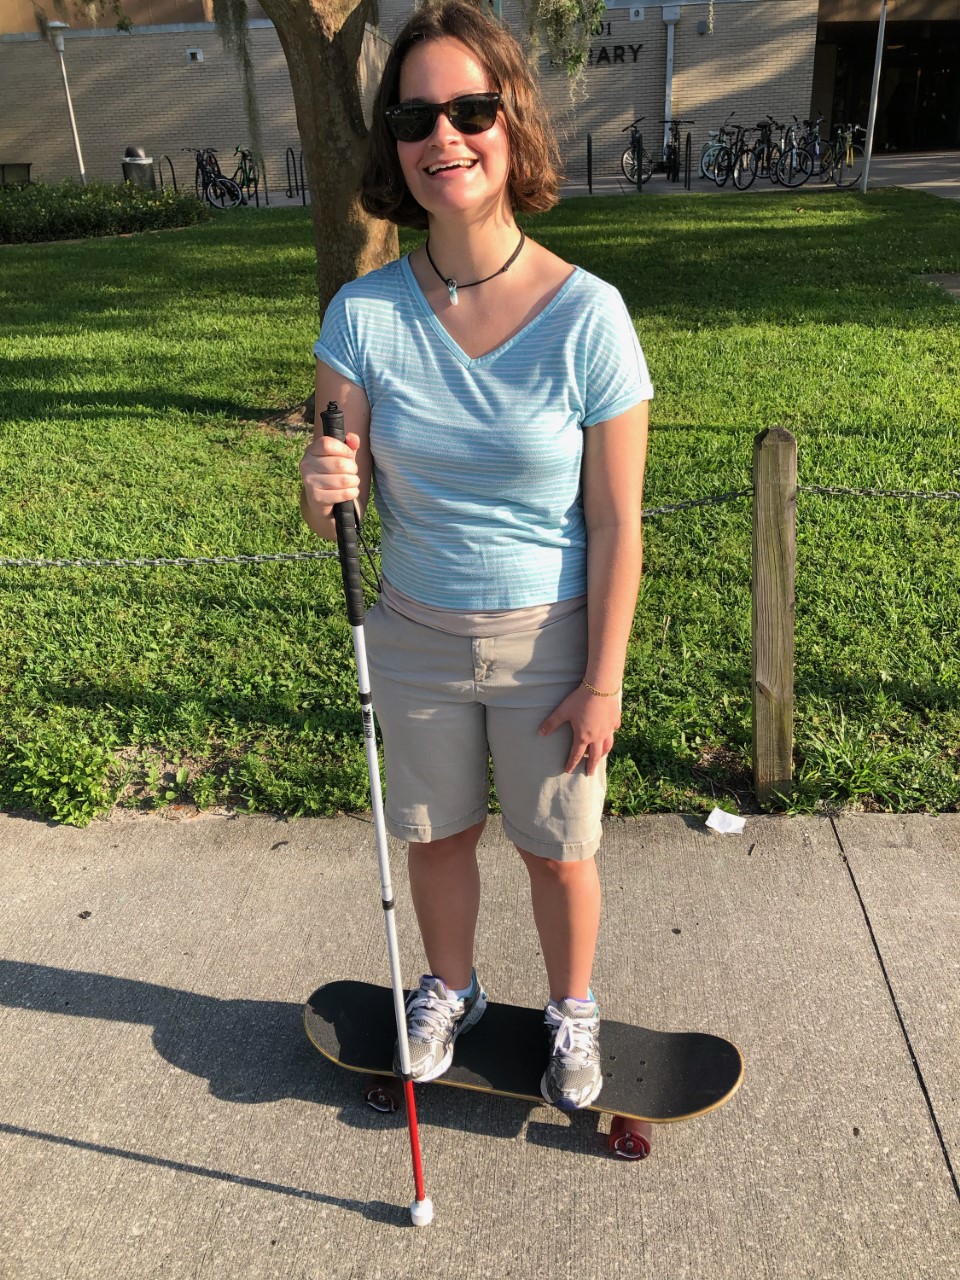 Claudia, a USF student, rides a skateboard with her white cane